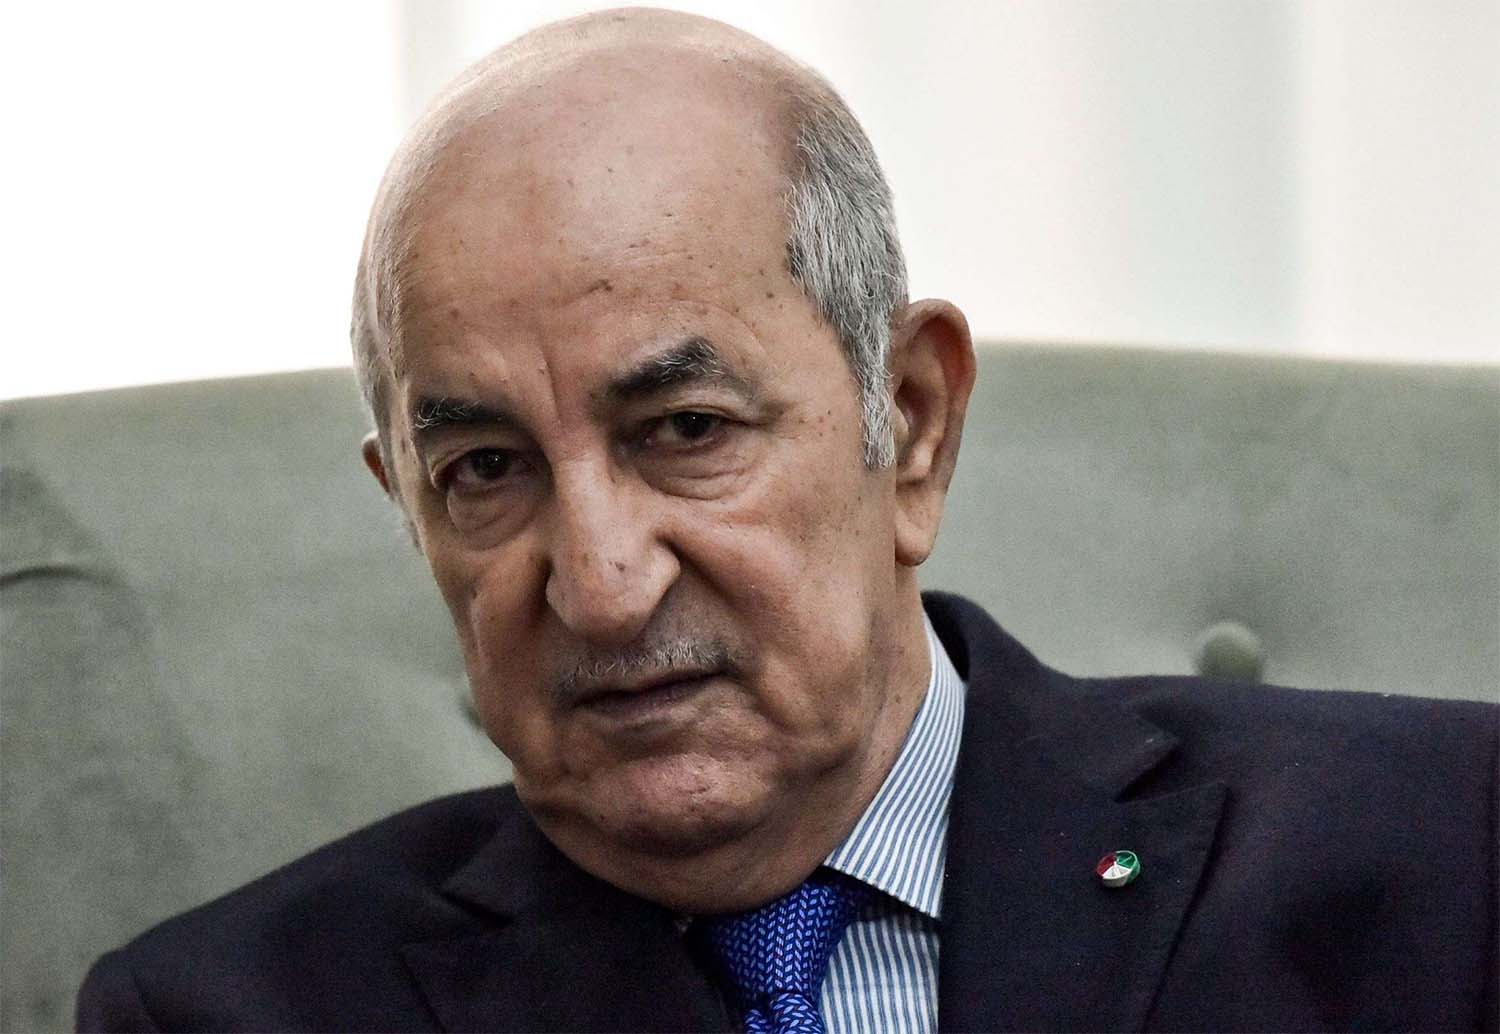 Tebboune said his return to Germany was previously planned